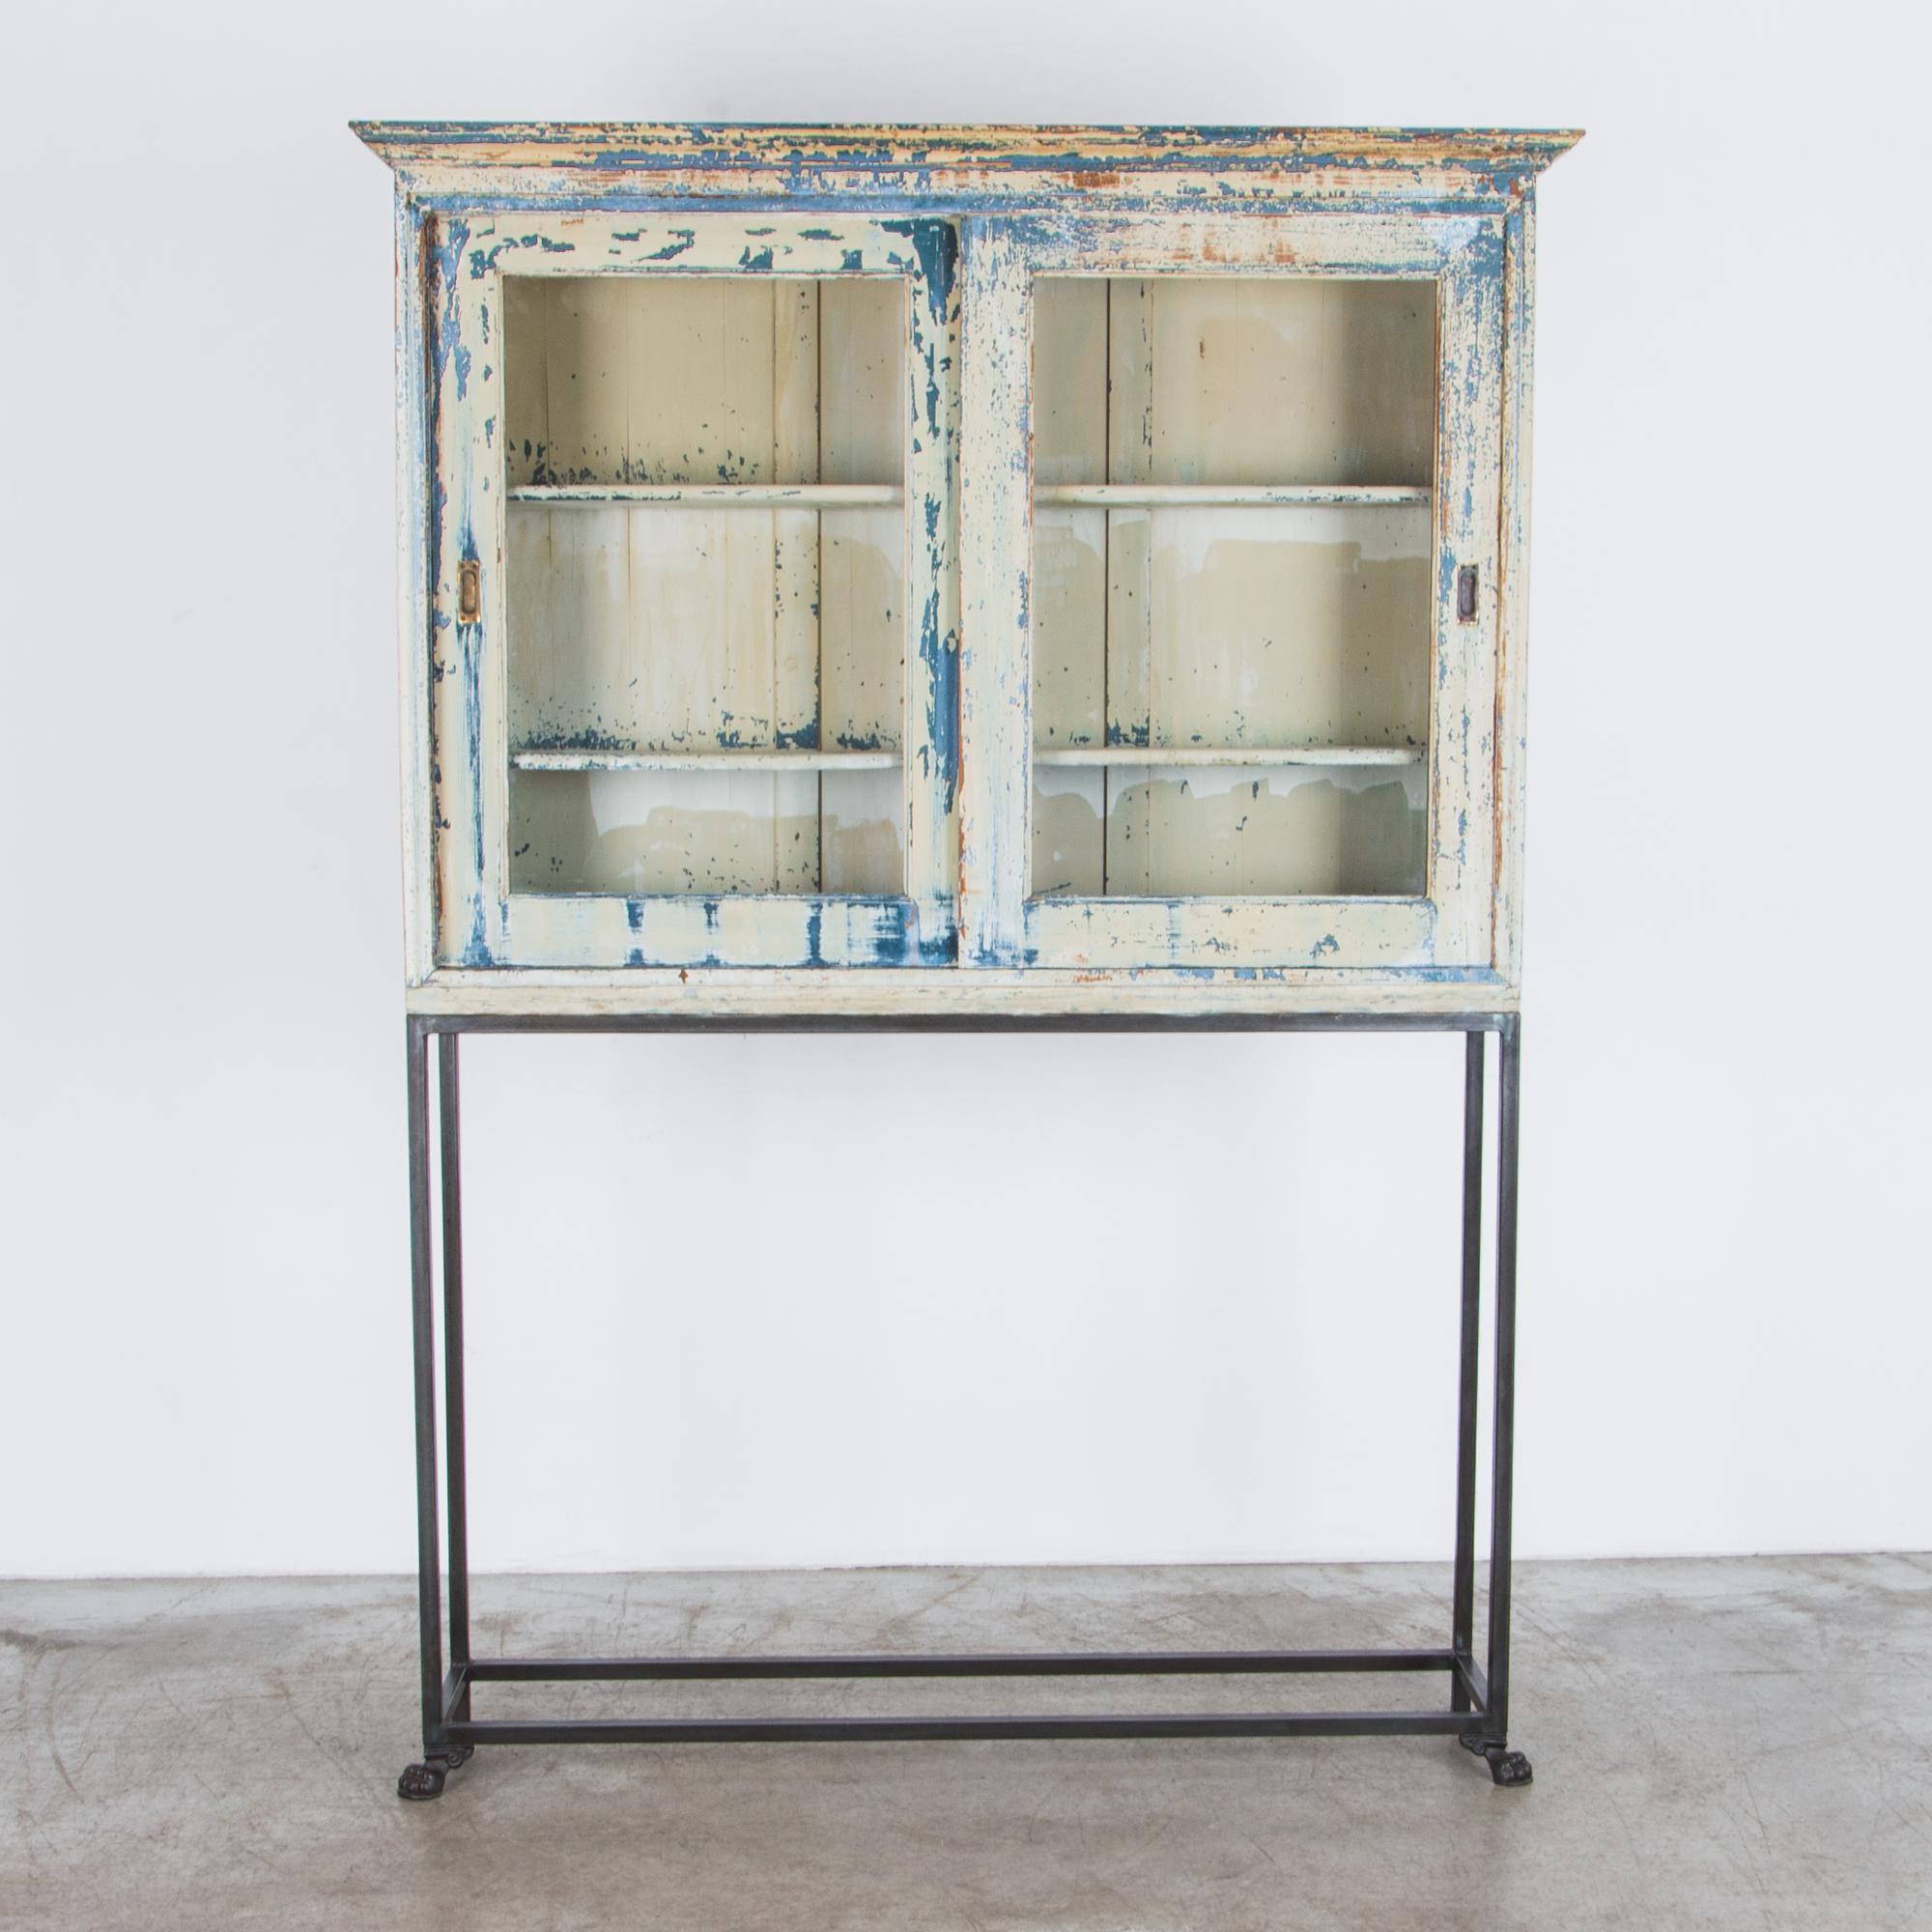 This wooden vitrine features two shelves and a set of glass-fronted sliding doors, made in France in 1920. A charming patina reveals layers of cornflower blue, ochre and a cream white. The piece has been refreshed in our atelier and fitted with a